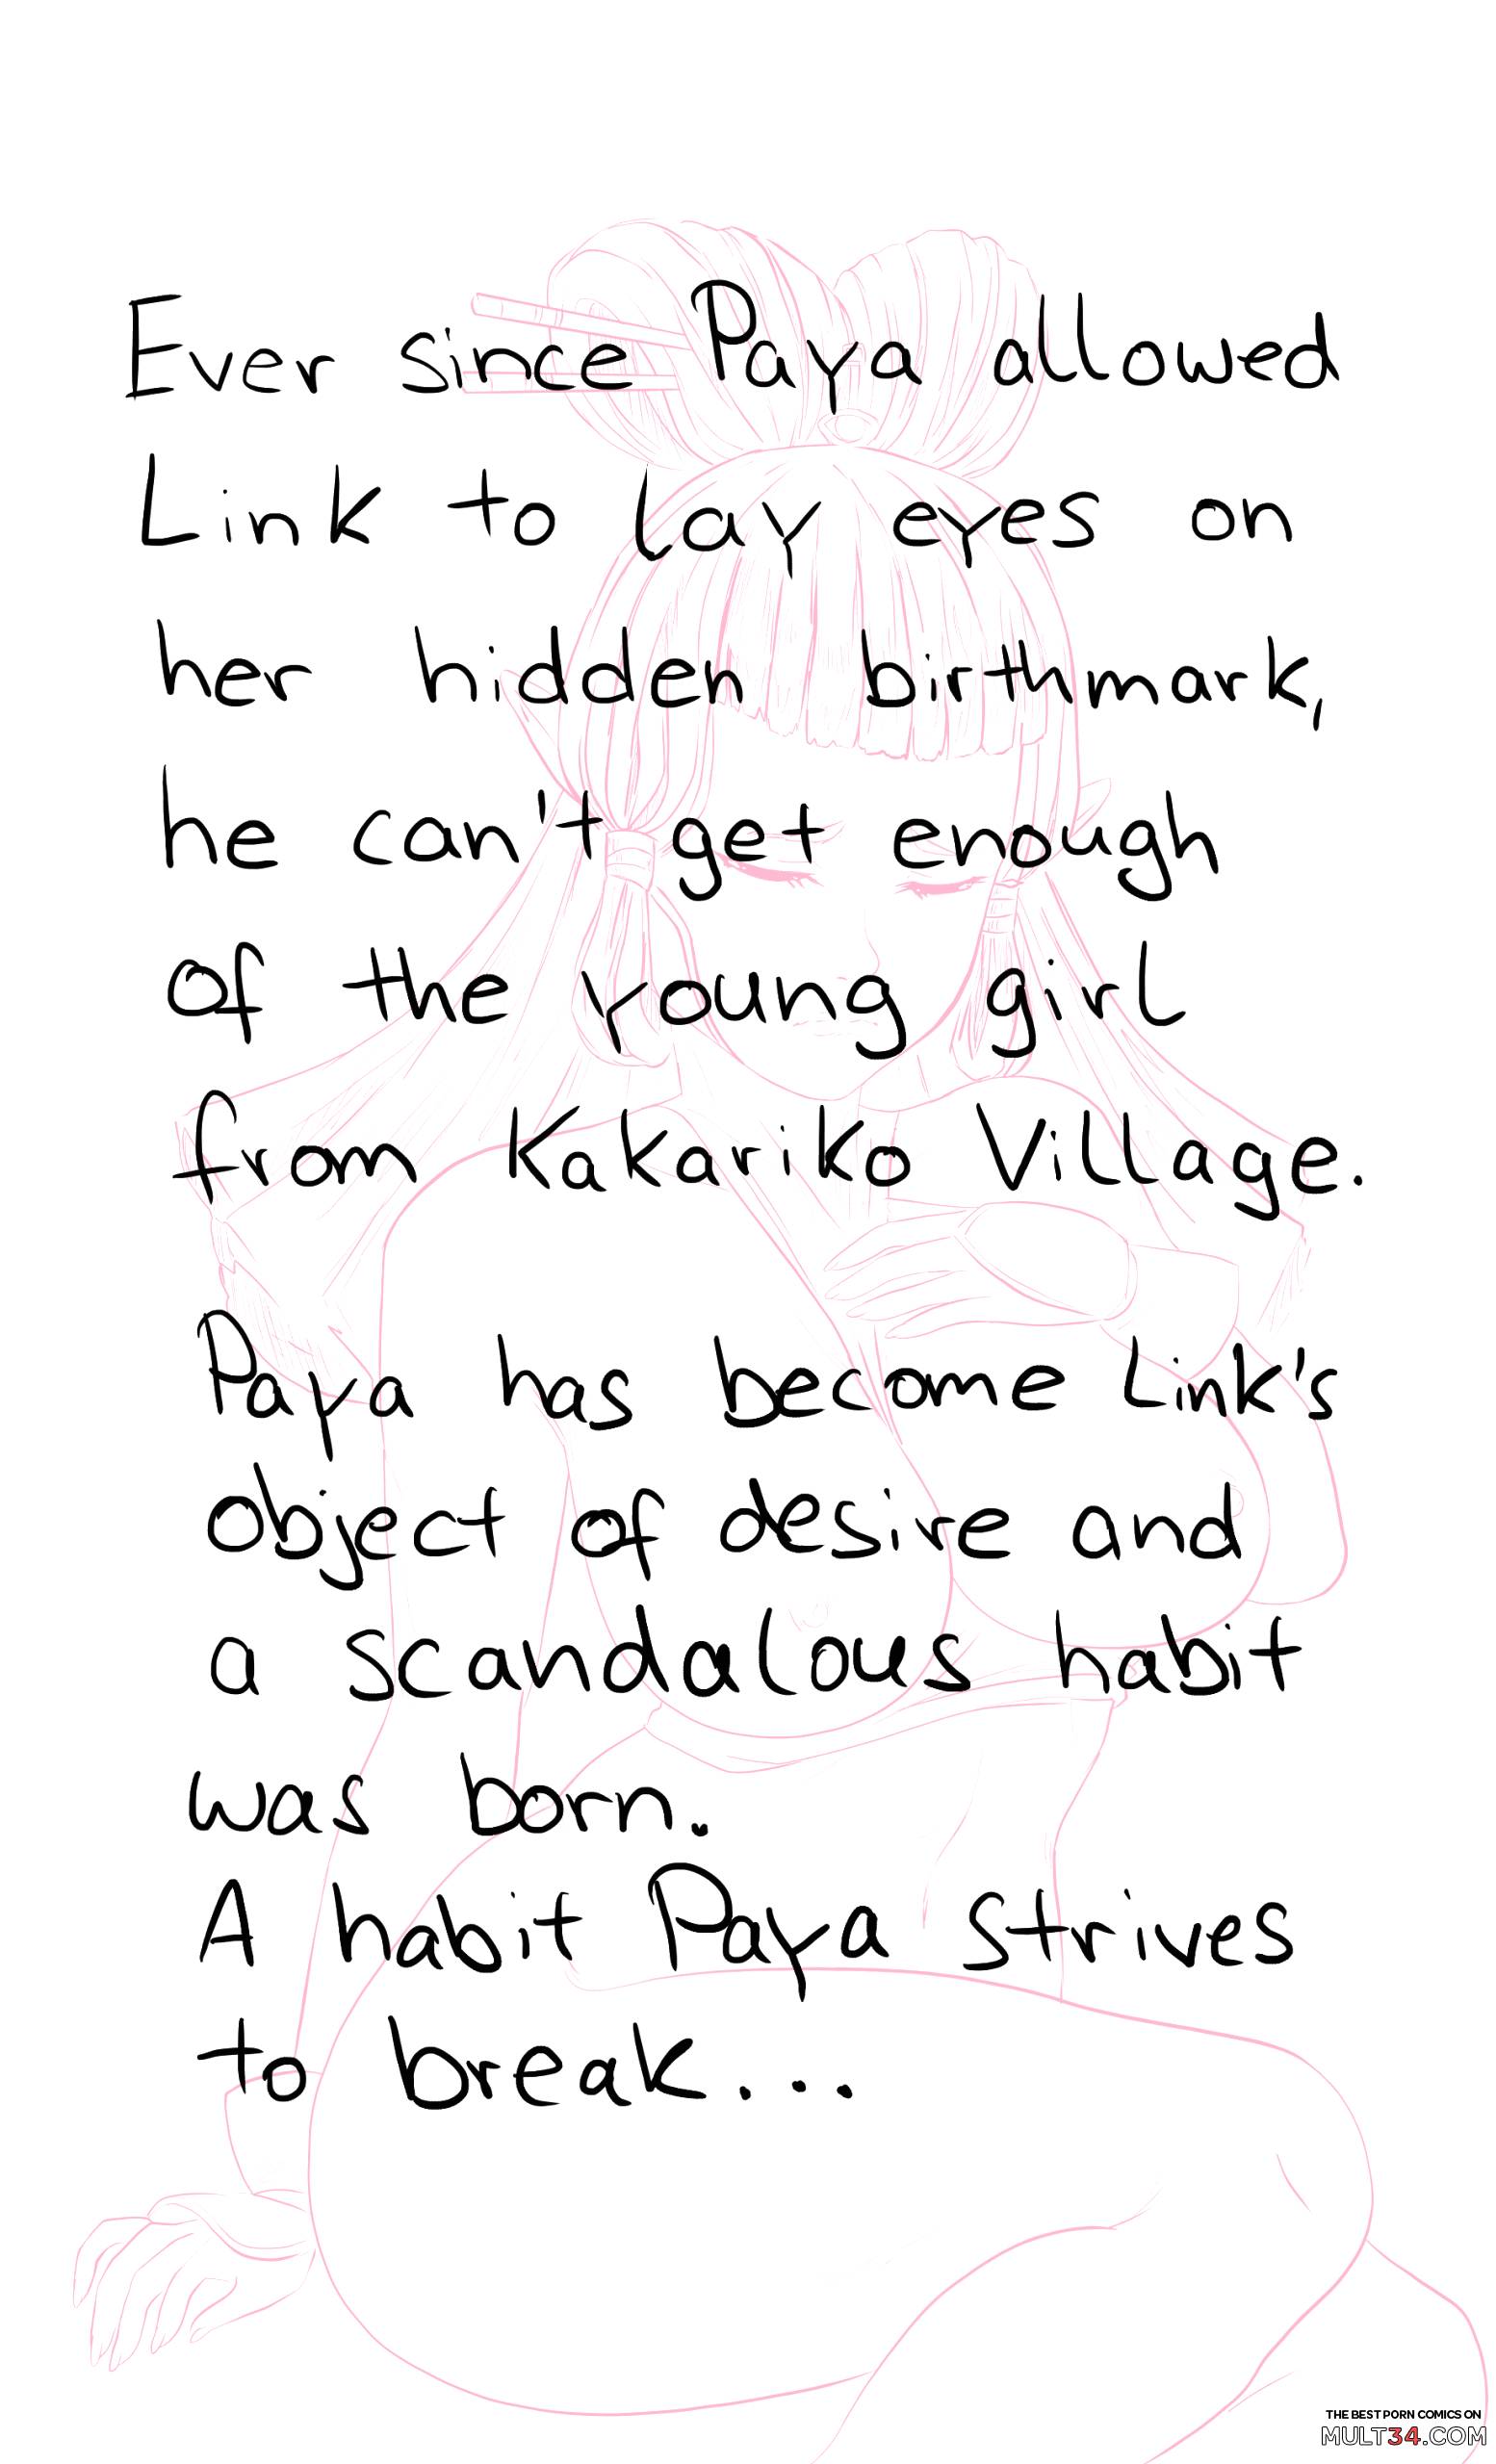 Playtime with Paya page 2